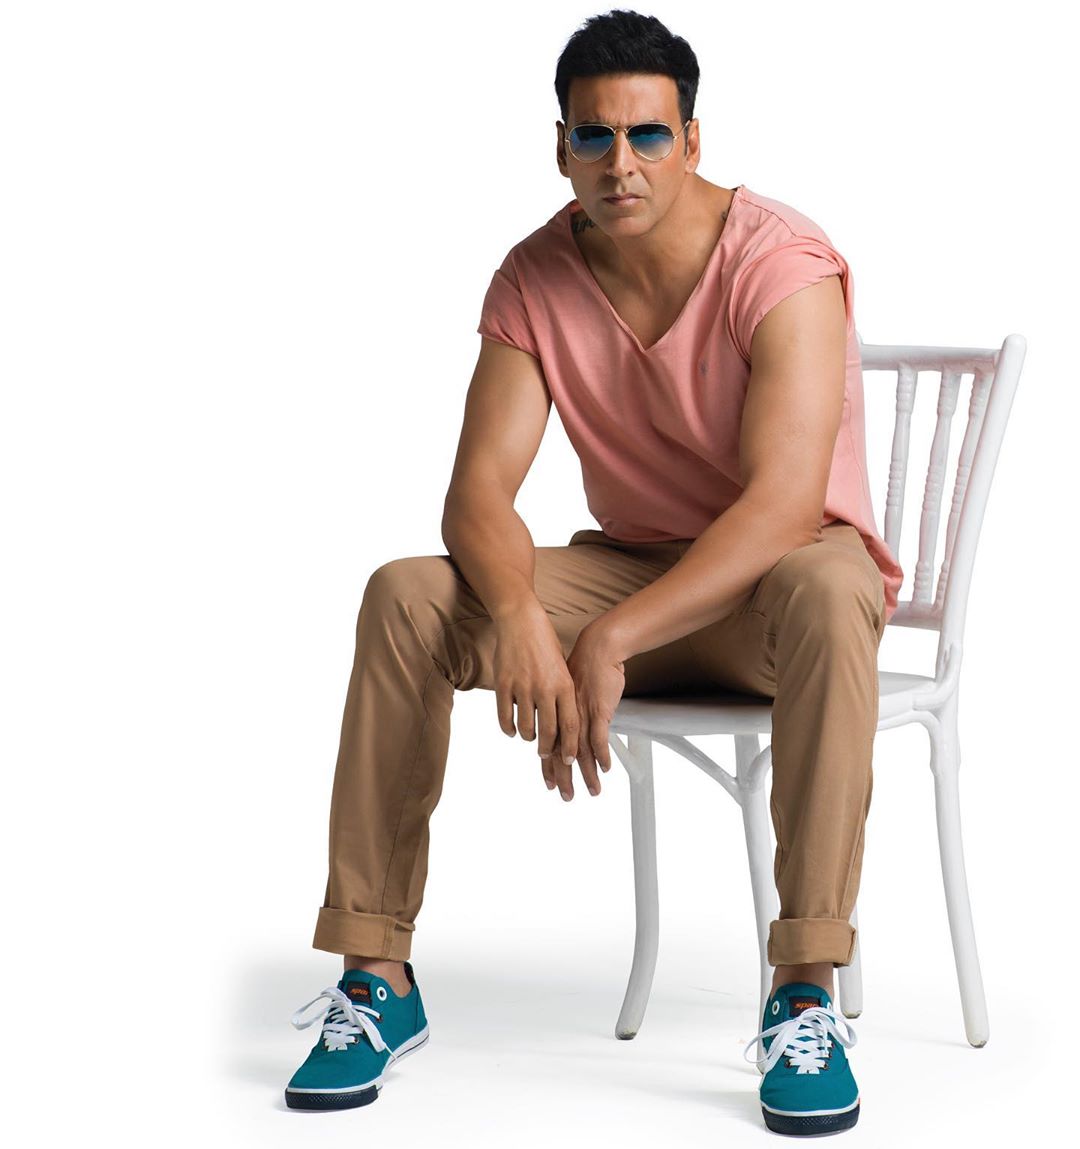 Akshay Kumar only Bollywood star among Forbes highest-paid actors of 2020